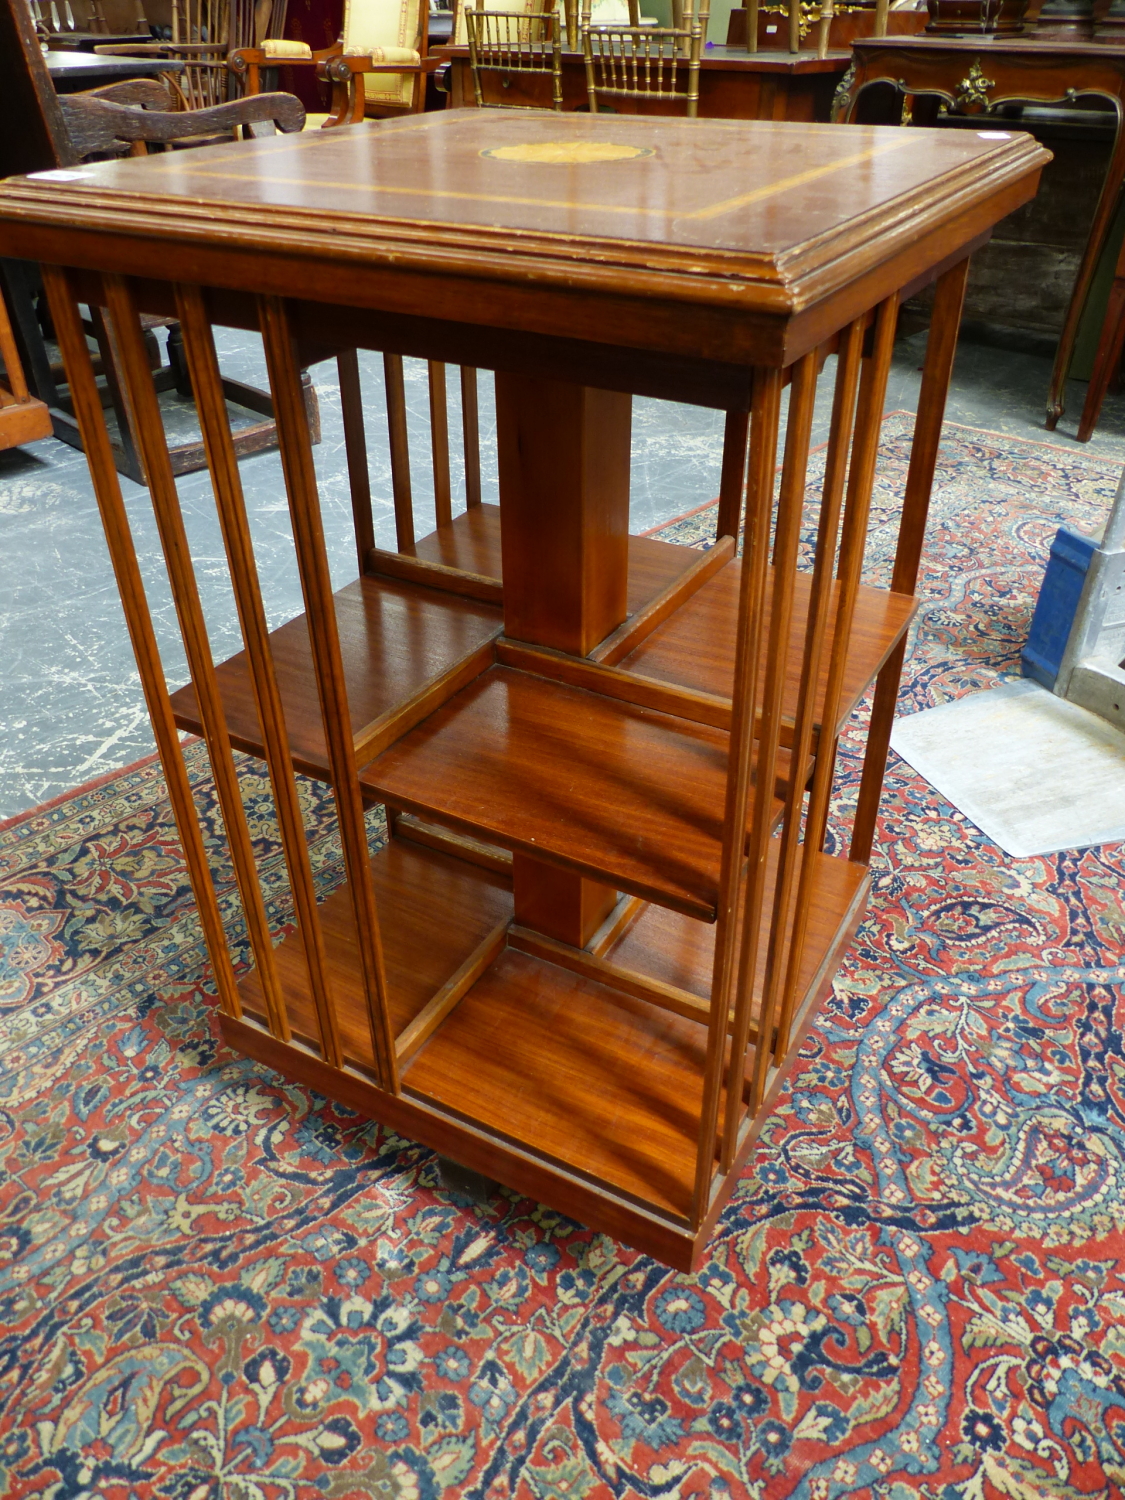 AN EDWARDIAN STYLE MAHOGANY AND INLAID SMALL REVOLVING BOOKCASE. 48 x 48 x H.79cms. - Image 2 of 4